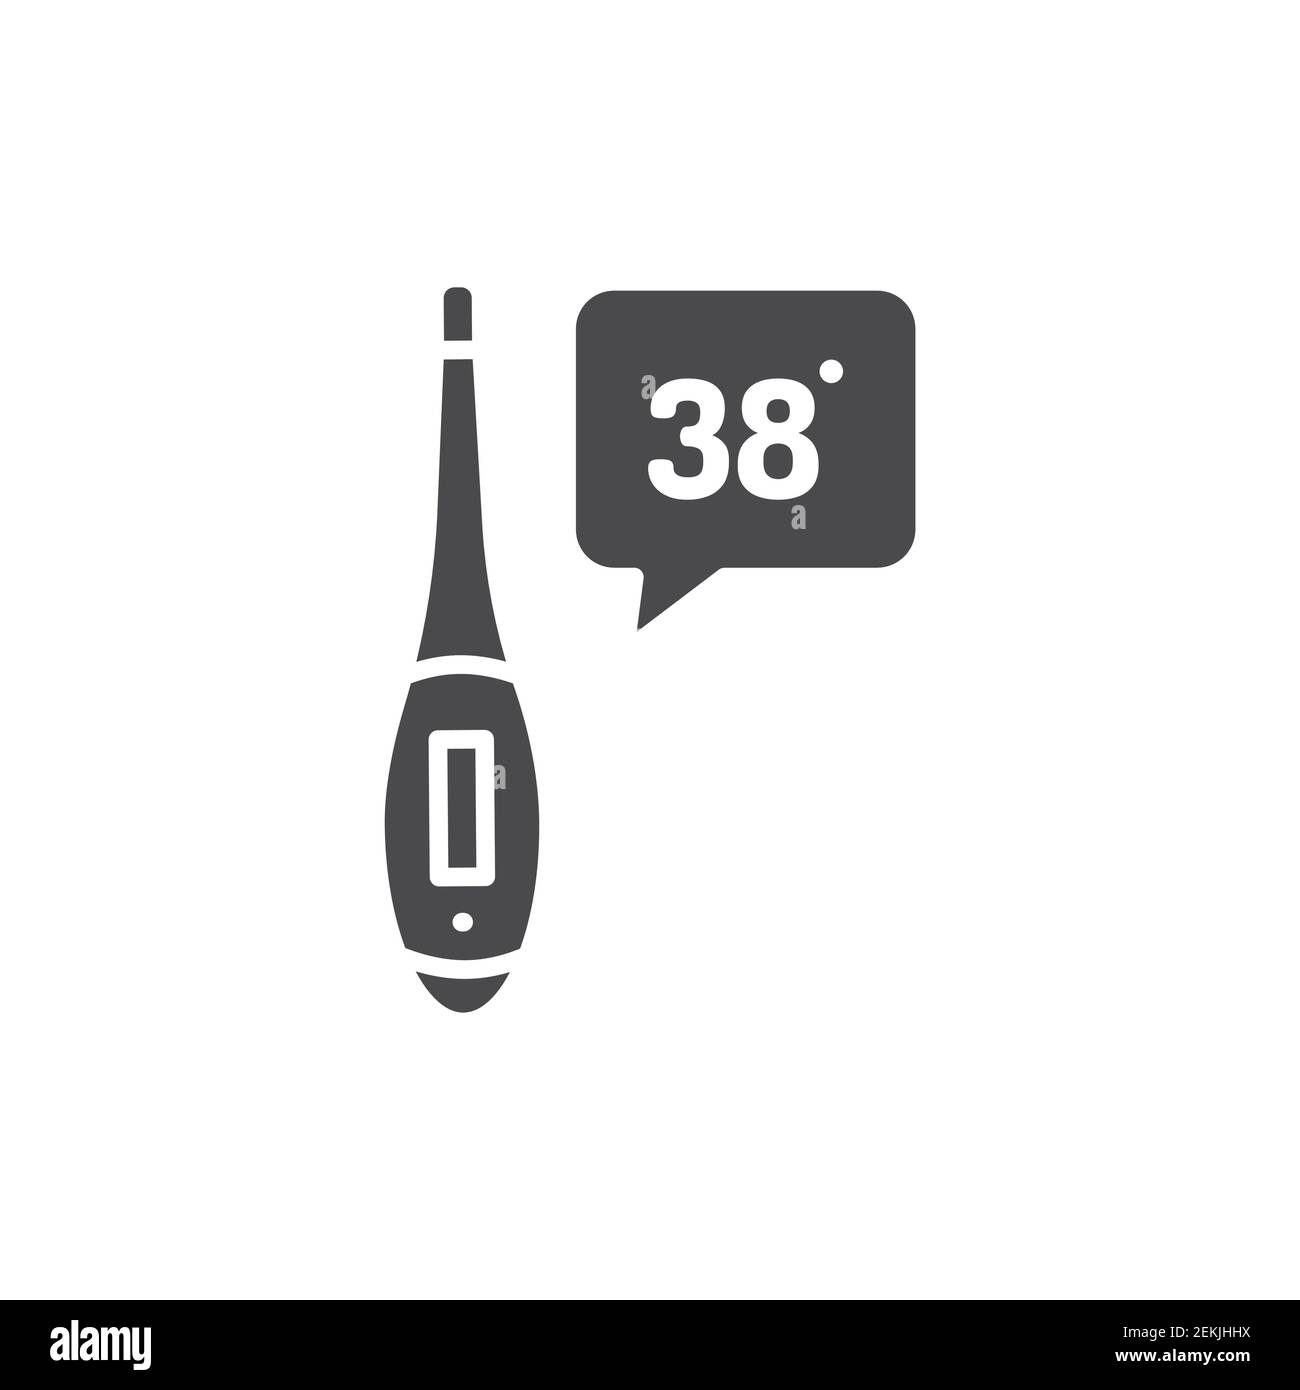 Thermometer measures temperature black glyph icon. Isolated vector element. Outline pictogram for web page, mobile app, promo. Stock Vector